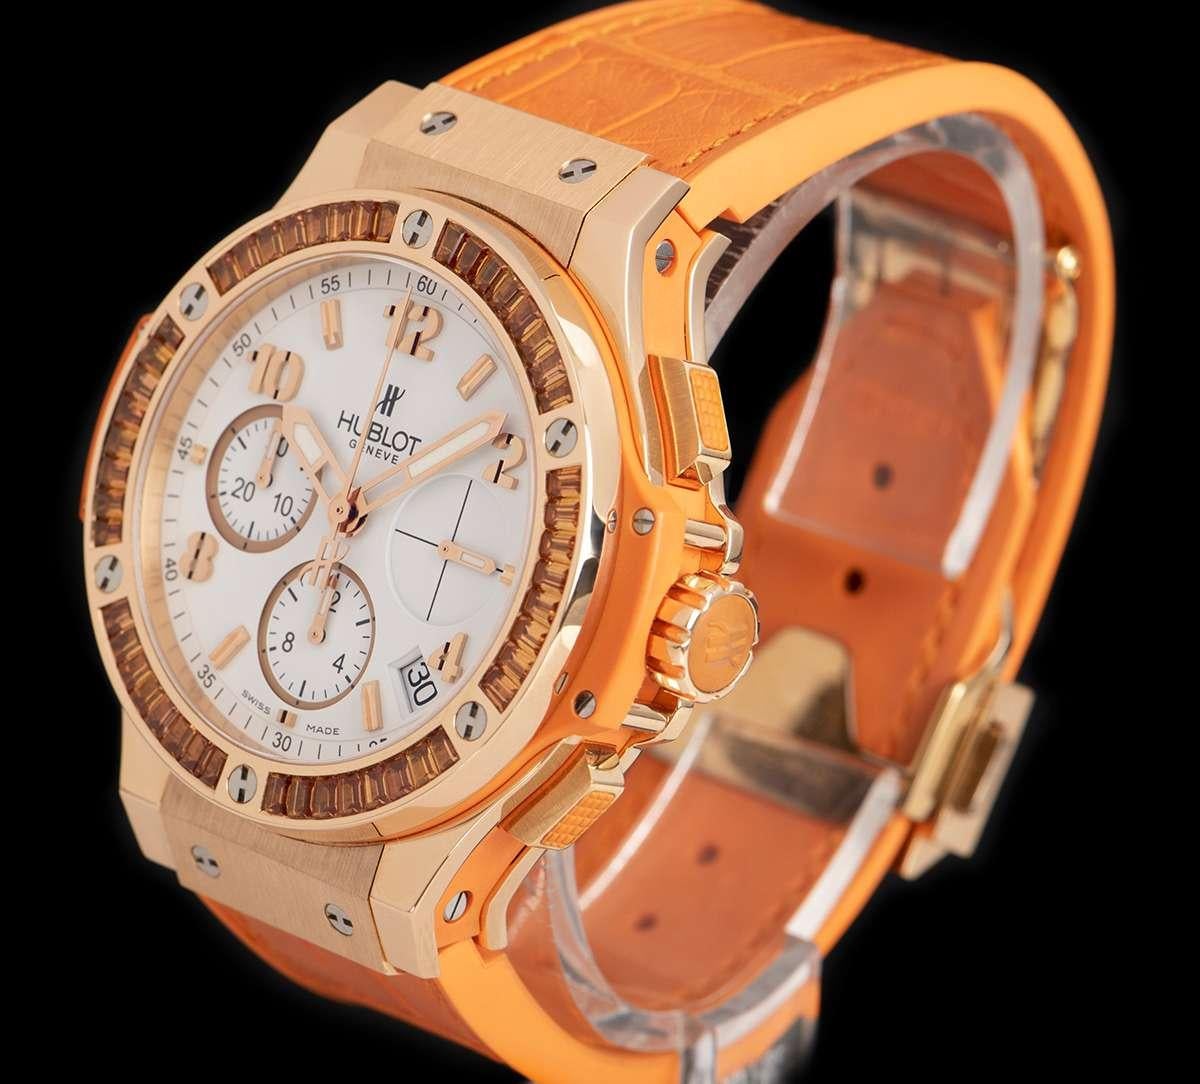 An 18k Rose Gold Big Bang Tutti Frutti Gents Wristwatch, white dial with applied hour markers and applied arabic numbers at 2, 4, 8, 10 and 12, small seconds at 3 0'clock, date between 4 and 5 0'clock, 12 hour recorder at 6 0'clock, 30 minute